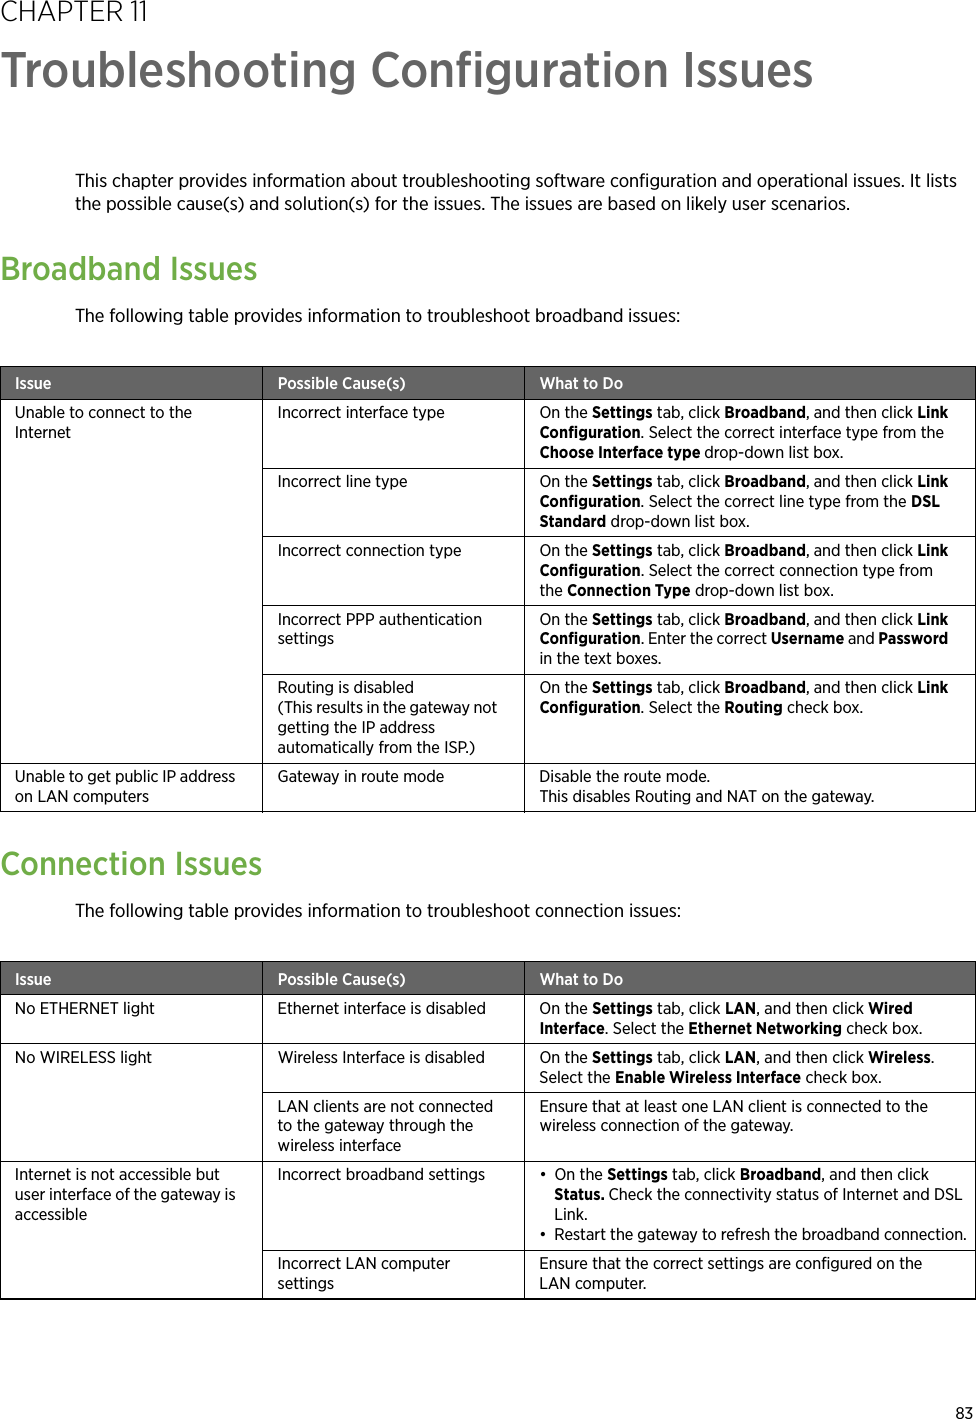 83CHAPTER 11Troubleshooting Configuration IssuesThis chapter provides information about troubleshooting software configuration and operational issues. It lists the possible cause(s) and solution(s) for the issues. The issues are based on likely user scenarios.Broadband IssuesThe following table provides information to troubleshoot broadband issues:Connection IssuesThe following table provides information to troubleshoot connection issues:Issue Possible Cause(s) What to DoUnable to connect to the InternetIncorrect interface type On the Settings tab, click Broadband, and then click Link Configuration. Select the correct interface type from the Choose Interface type drop-down list box.Incorrect line type On the Settings tab, click Broadband, and then click Link Configuration. Select the correct line type from the DSL Standard drop-down list box.Incorrect connection type On the Settings tab, click Broadband, and then click Link Configuration. Select the correct connection type from the Connection Type drop-down list box.Incorrect PPP authentication settingsOn the Settings tab, click Broadband, and then click Link Configuration. Enter the correct Username and Password in the text boxes.Routing is disabled(This results in the gateway not getting the IP address automatically from the ISP.)On the Settings tab, click Broadband, and then click Link Configuration. Select the Routing check box.Unable to get public IP address on LAN computersGateway in route mode Disable the route mode. This disables Routing and NAT on the gateway.Issue Possible Cause(s) What to DoNo ETHERNET light Ethernet interface is disabled On the Settings tab, click LAN, and then click Wired Interface. Select the Ethernet Networking check box.No WIRELESS light Wireless Interface is disabled On the Settings tab, click LAN, and then click Wireless. Select the Enable Wireless Interface check box.LAN clients are not connected to the gateway through the wireless interfaceEnsure that at least one LAN client is connected to the wireless connection of the gateway.Internet is not accessible but user interface of the gateway is accessibleIncorrect broadband settings • On the Settings tab, click Broadband, and then click Status. Check the connectivity status of Internet and DSL Link.• Restart the gateway to refresh the broadband connection.Incorrect LAN computer settingsEnsure that the correct settings are configured on the LAN computer.